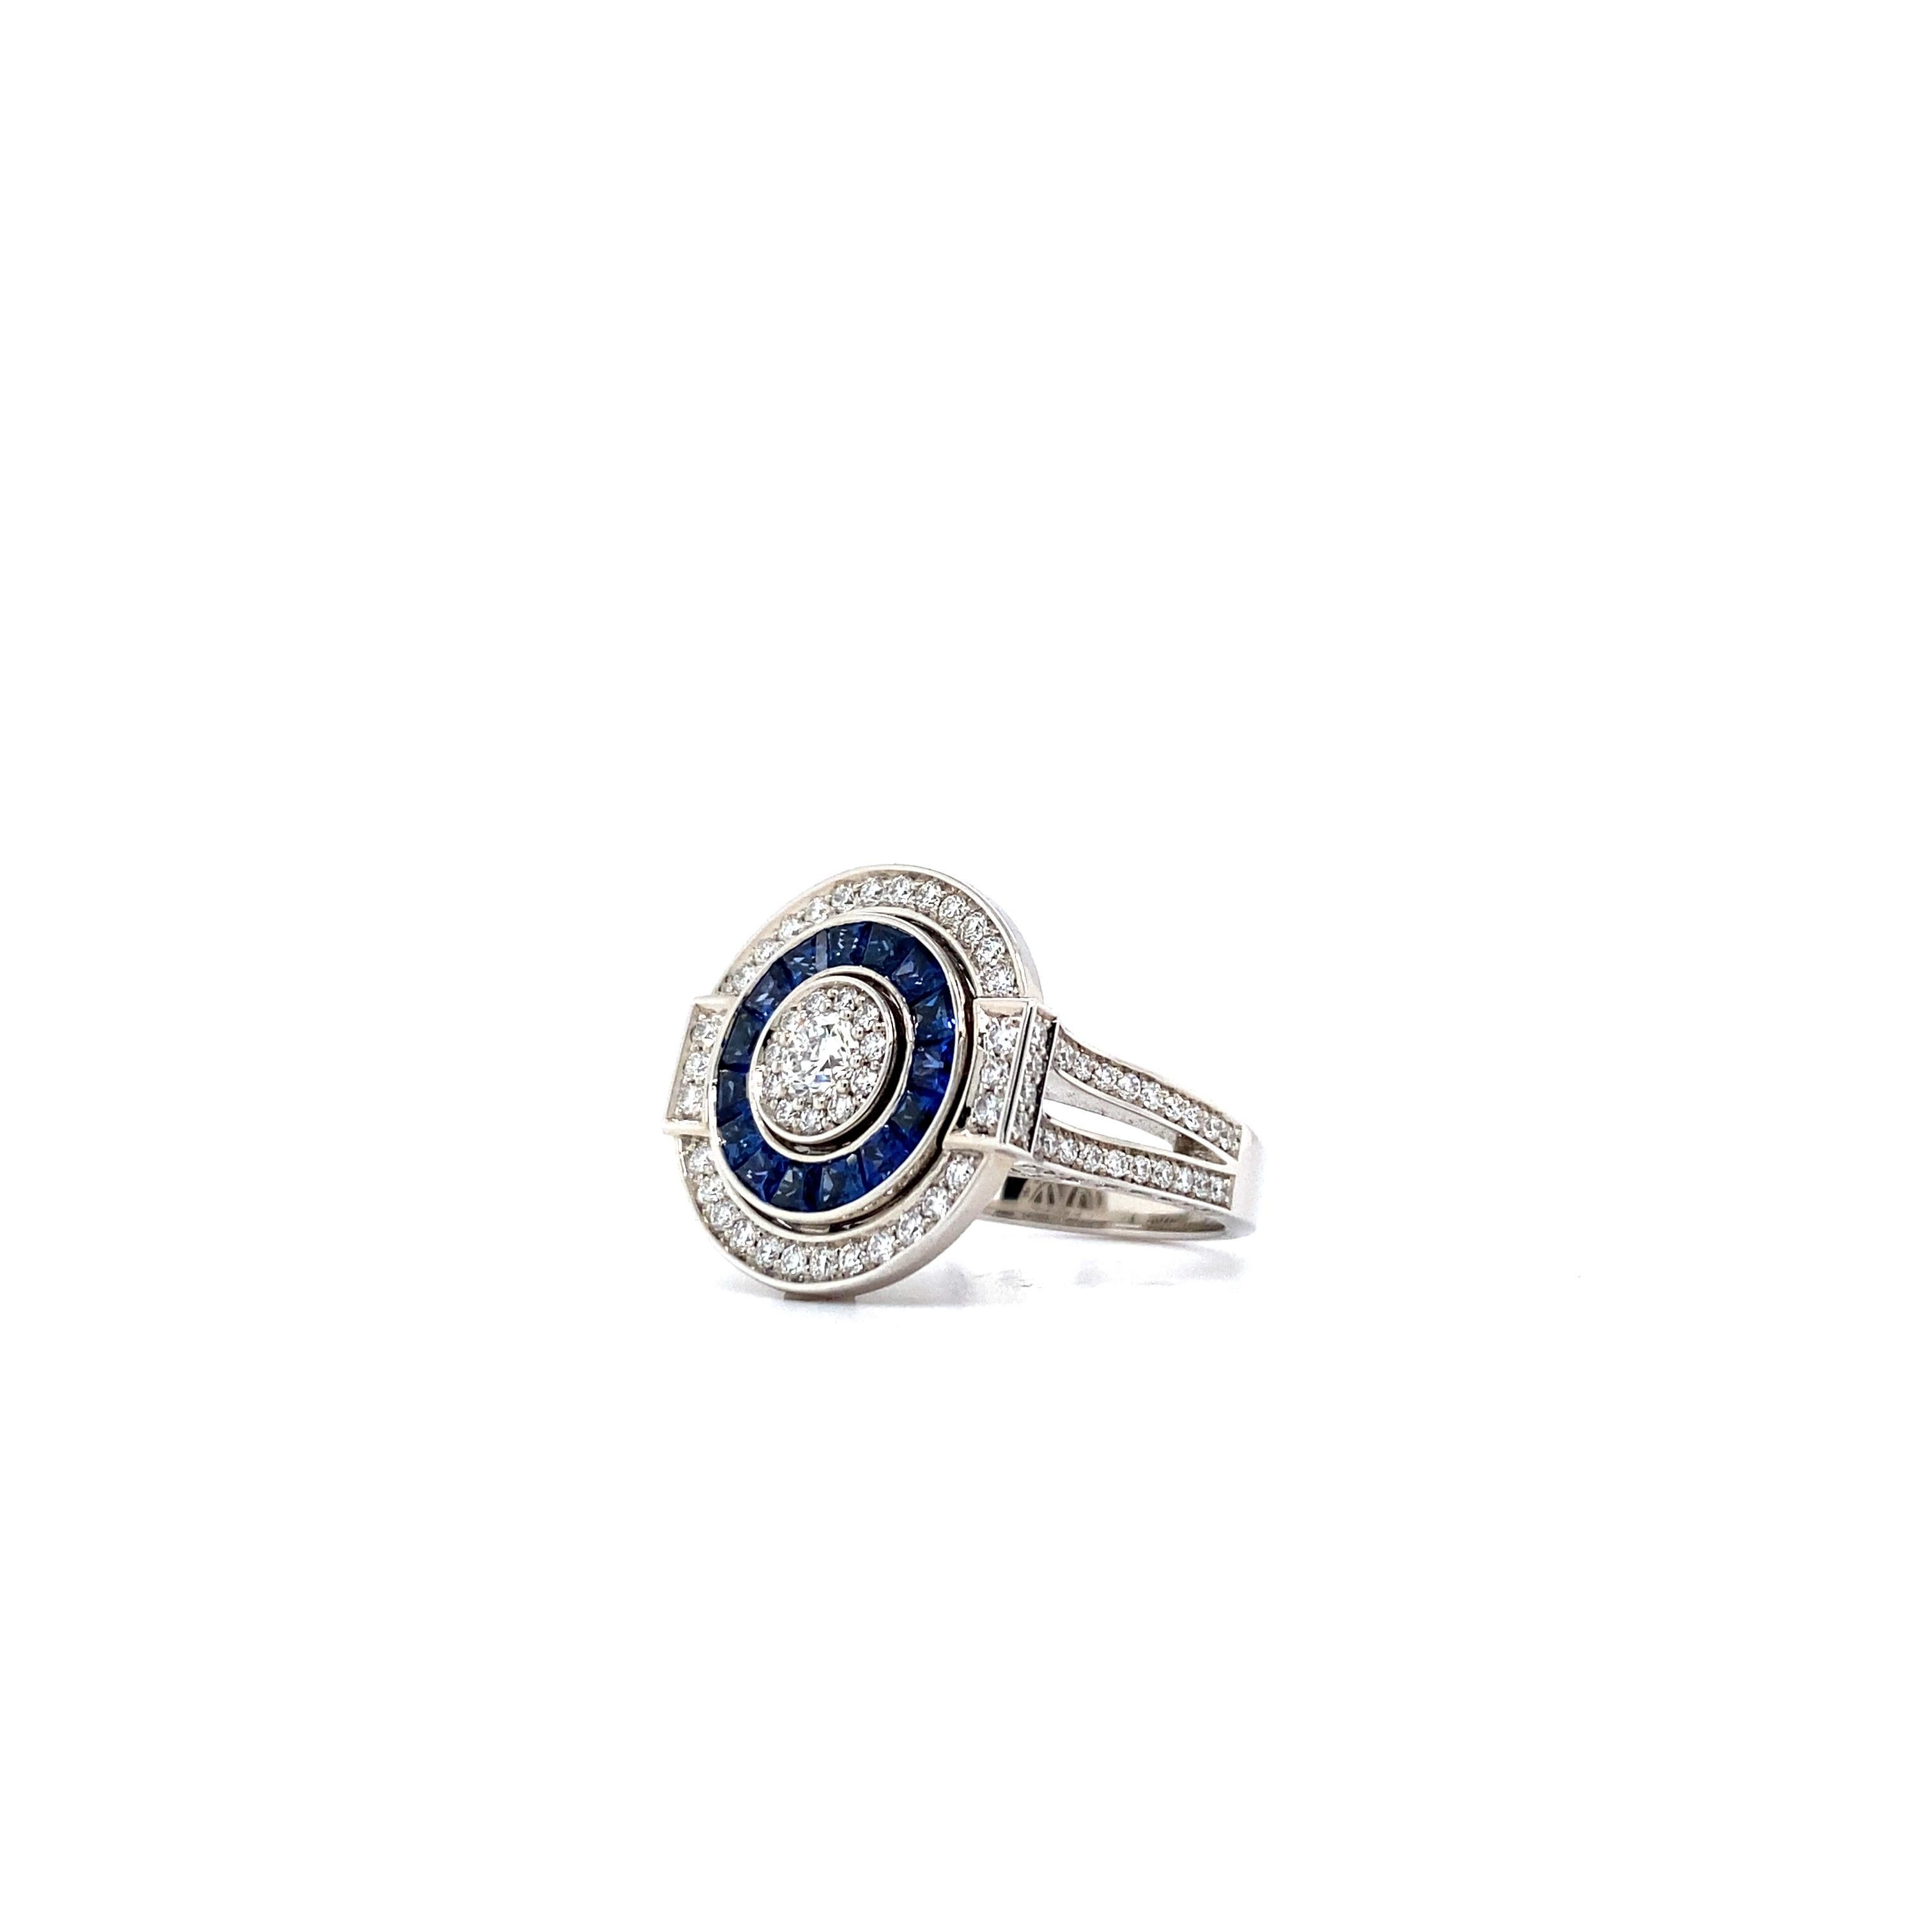 Victor Mayer Soiree Ring 18k White Gold Diamonds 1.13 ct Sapphire 0.97 ct For Sale 3